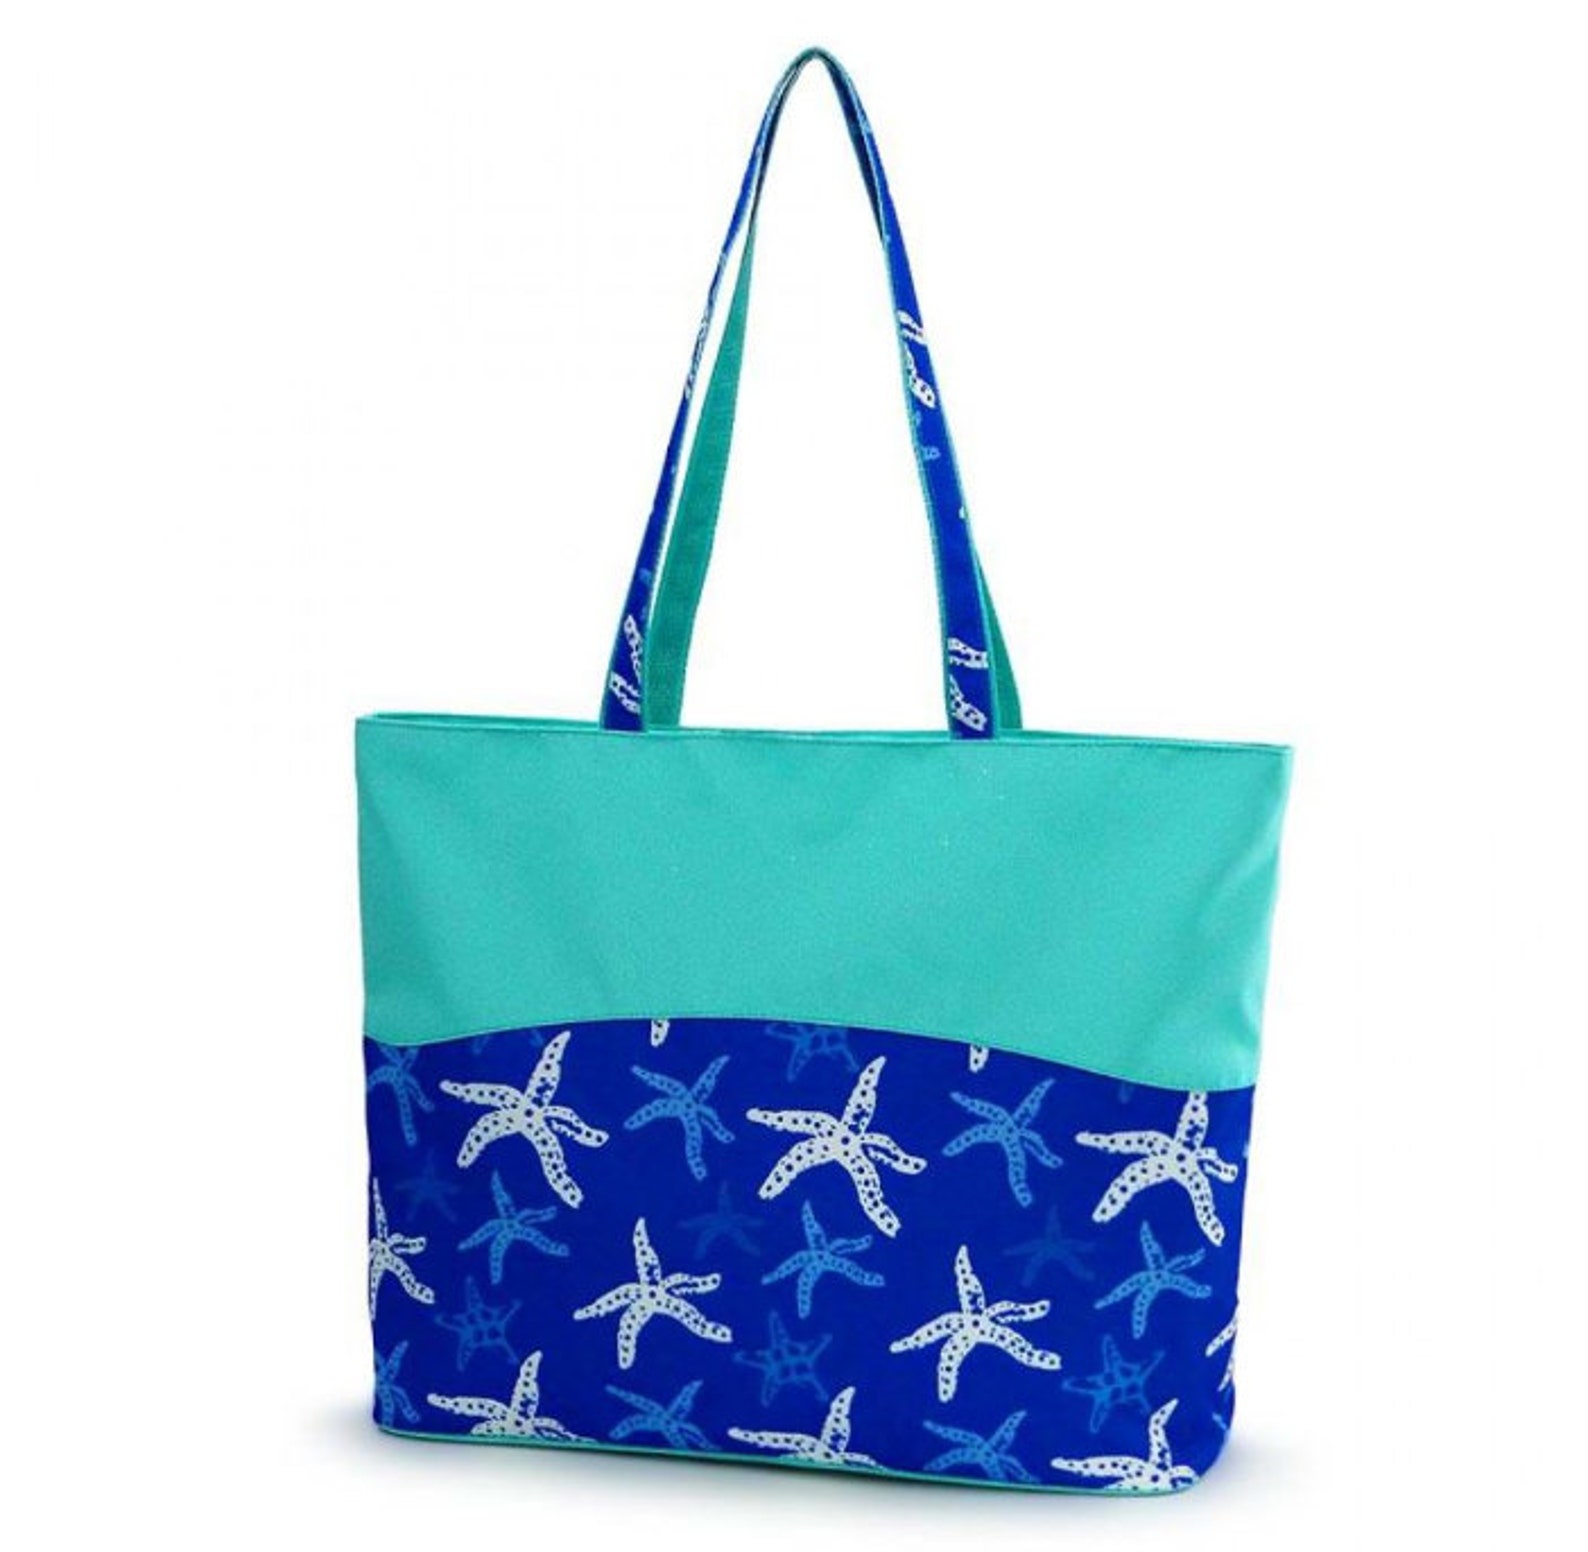 Starfish Tote Bag. monogrammed tote free personalization | Etsy